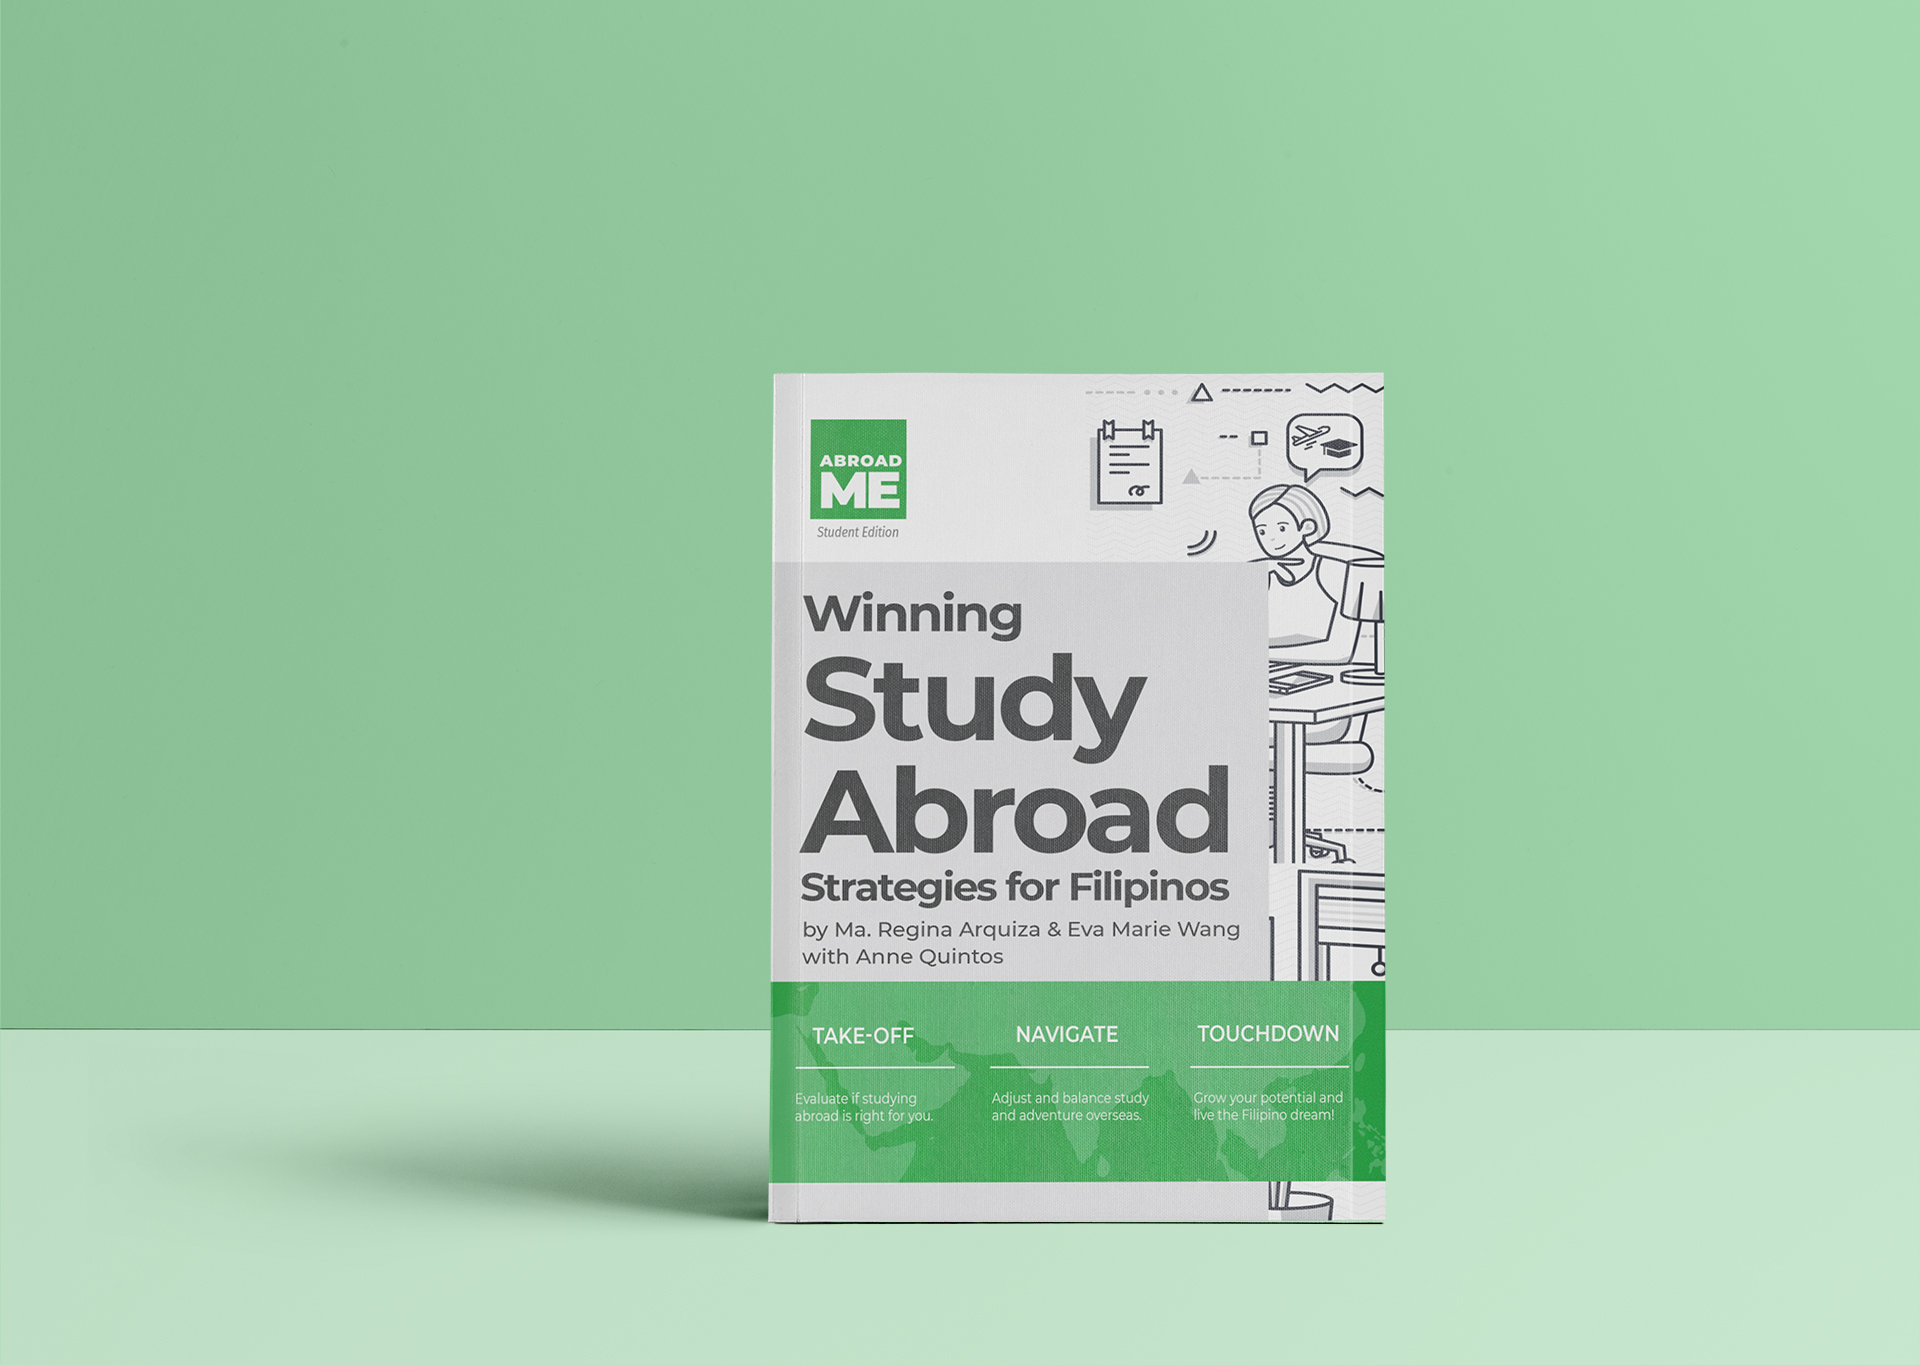 Abroad Me: Winning Study Abroad Strategies for Filipinos